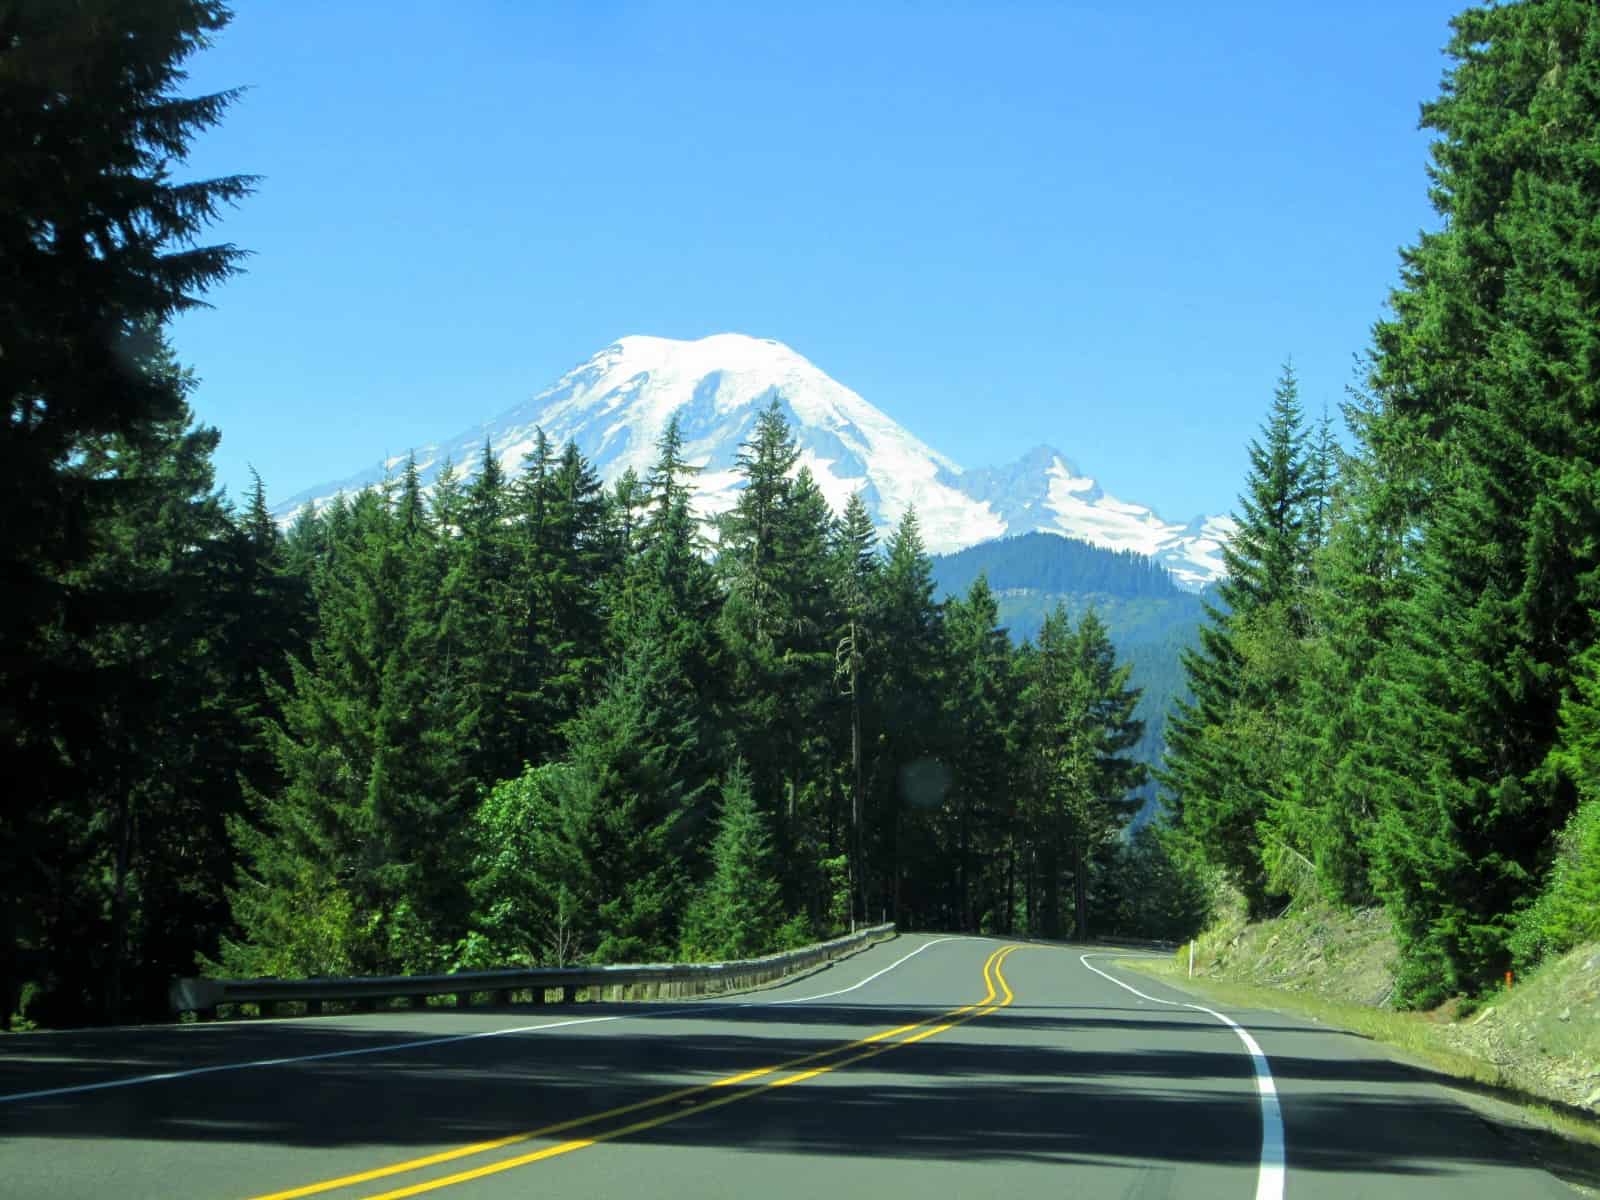 Sightsee on the White Pass and Chinook Scenic Byways